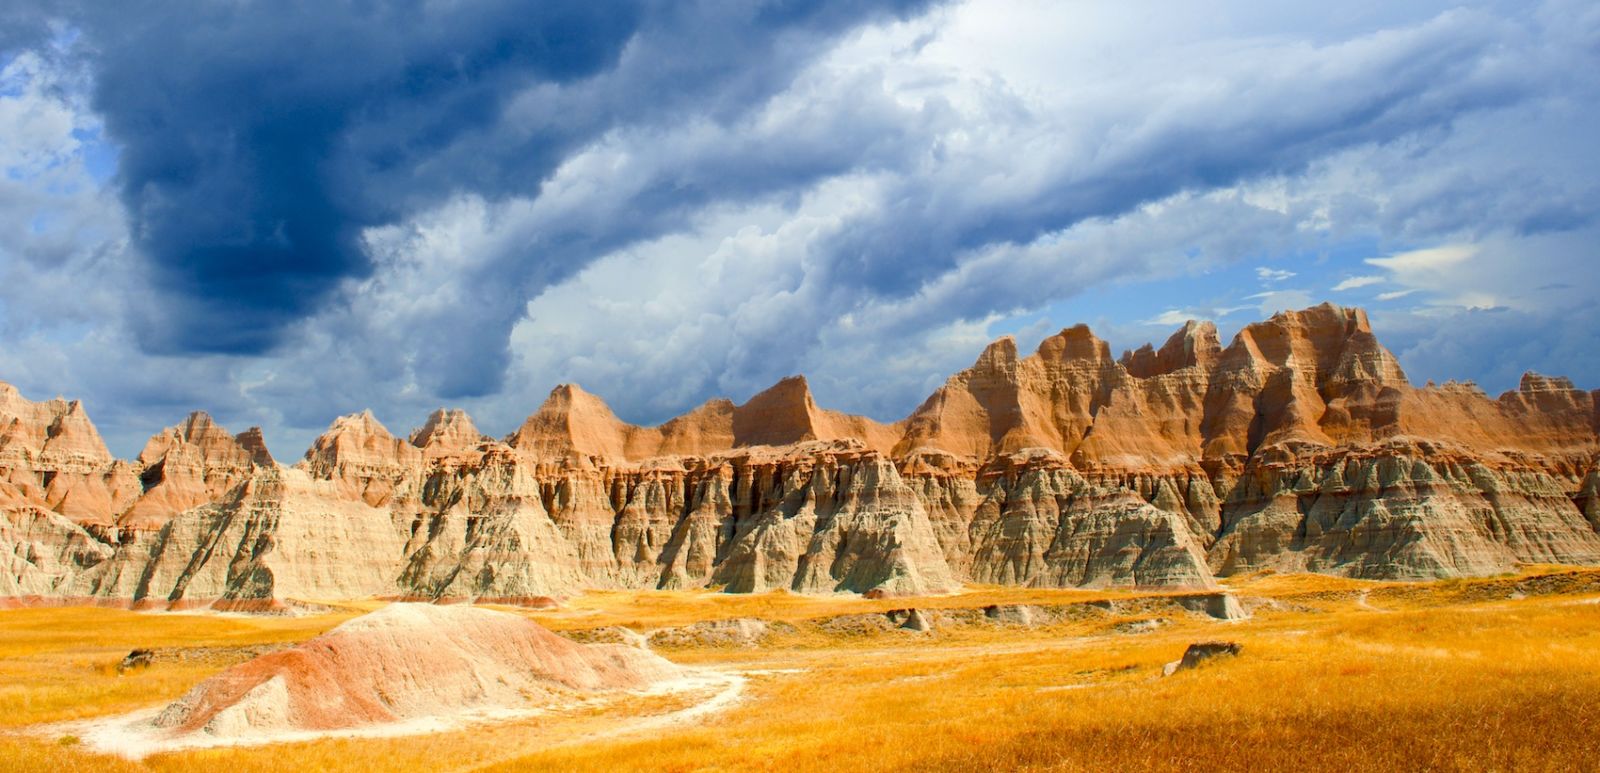 A stormy day the the Badlands national park South Dakota. Photo by Shutterstock.